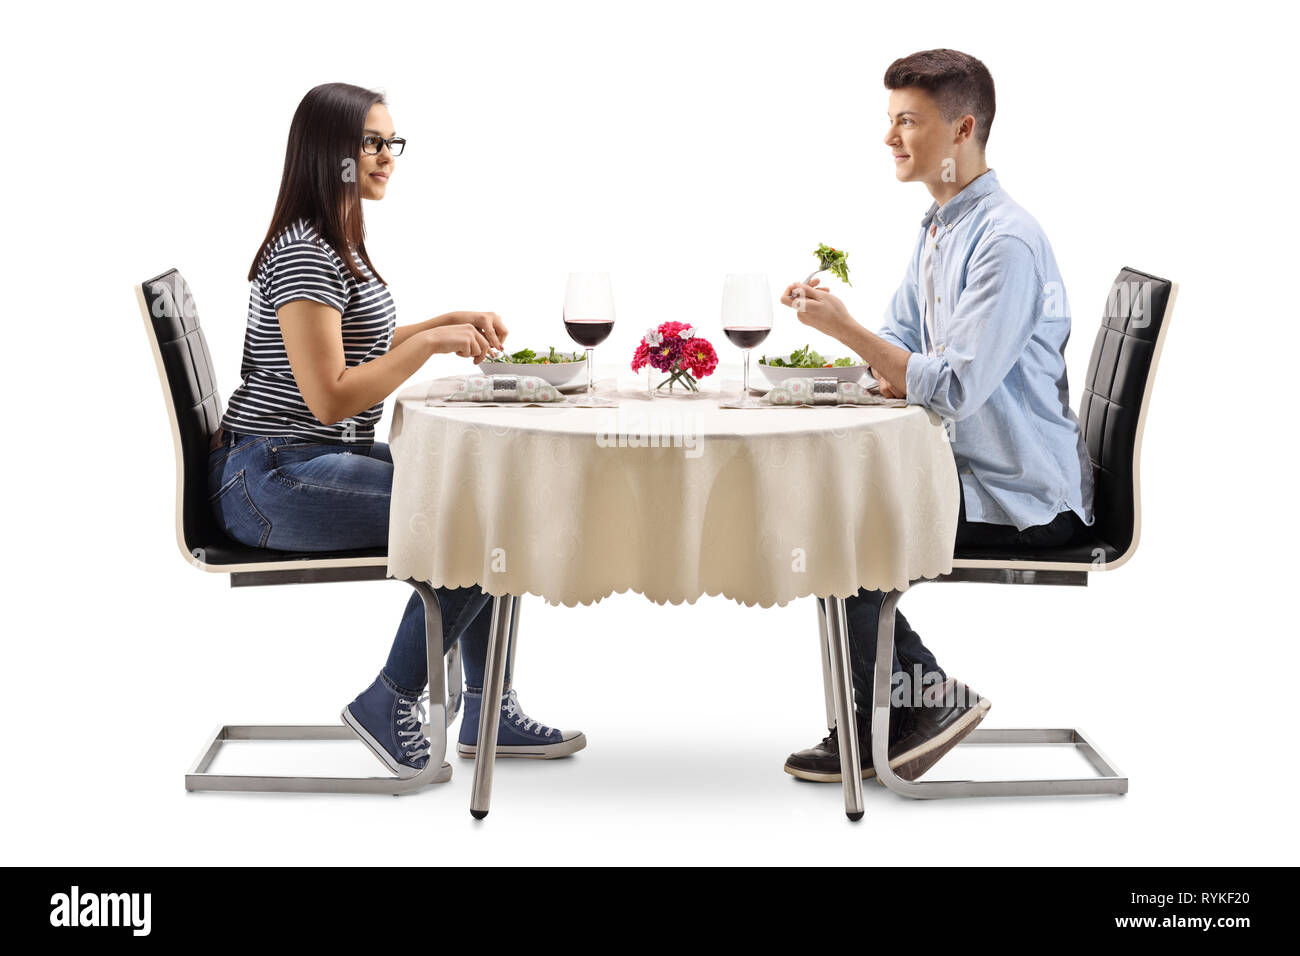 Full length profile of a young male and female eating a salad in a restaurant isolated on white background Stock Photo